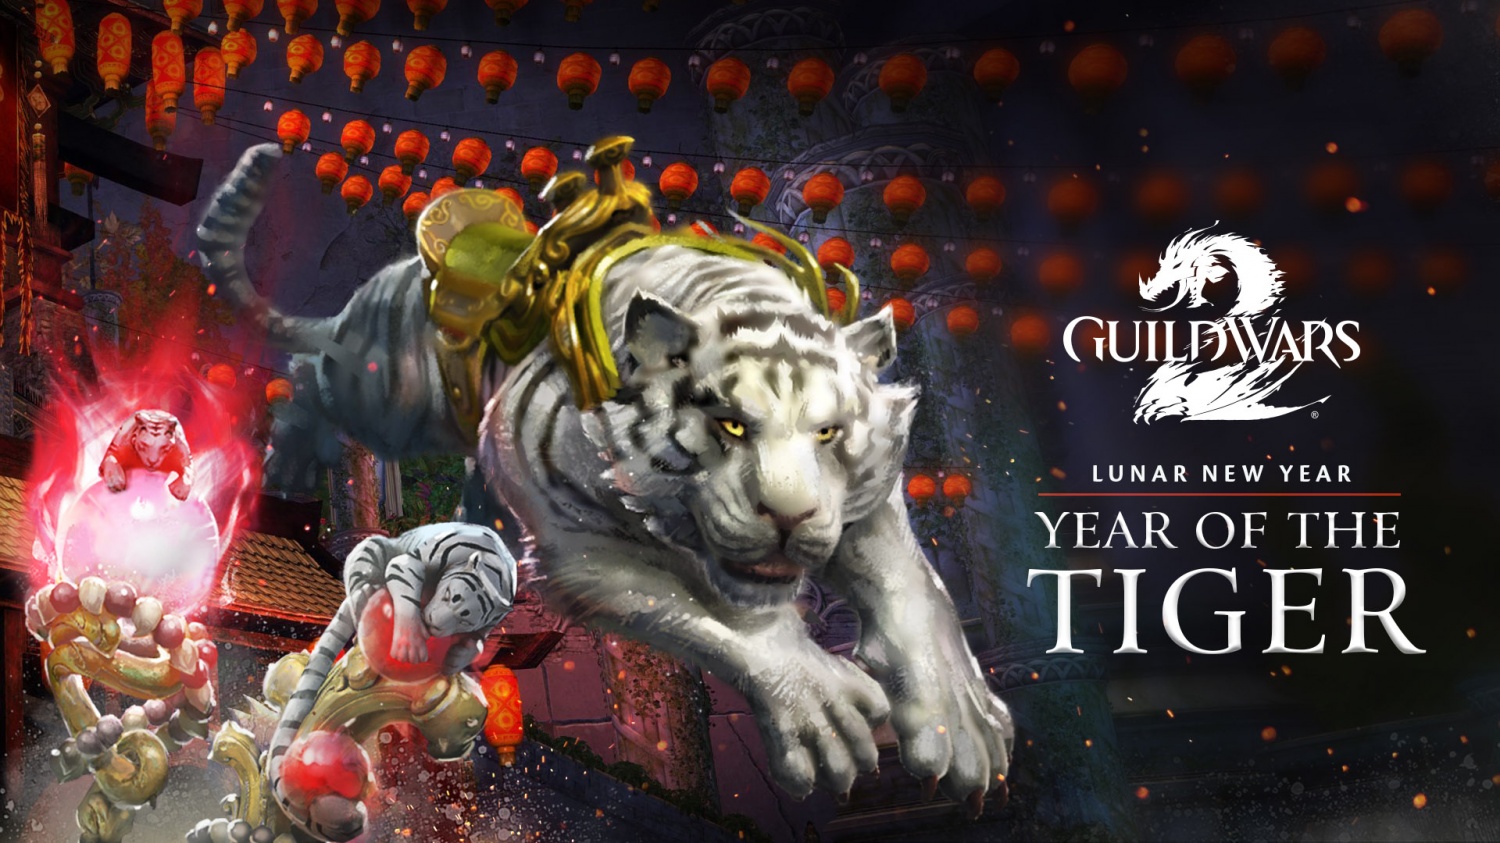 'Guild Wars 2' Lunar New Year 2022 Guide What Players Could Expect